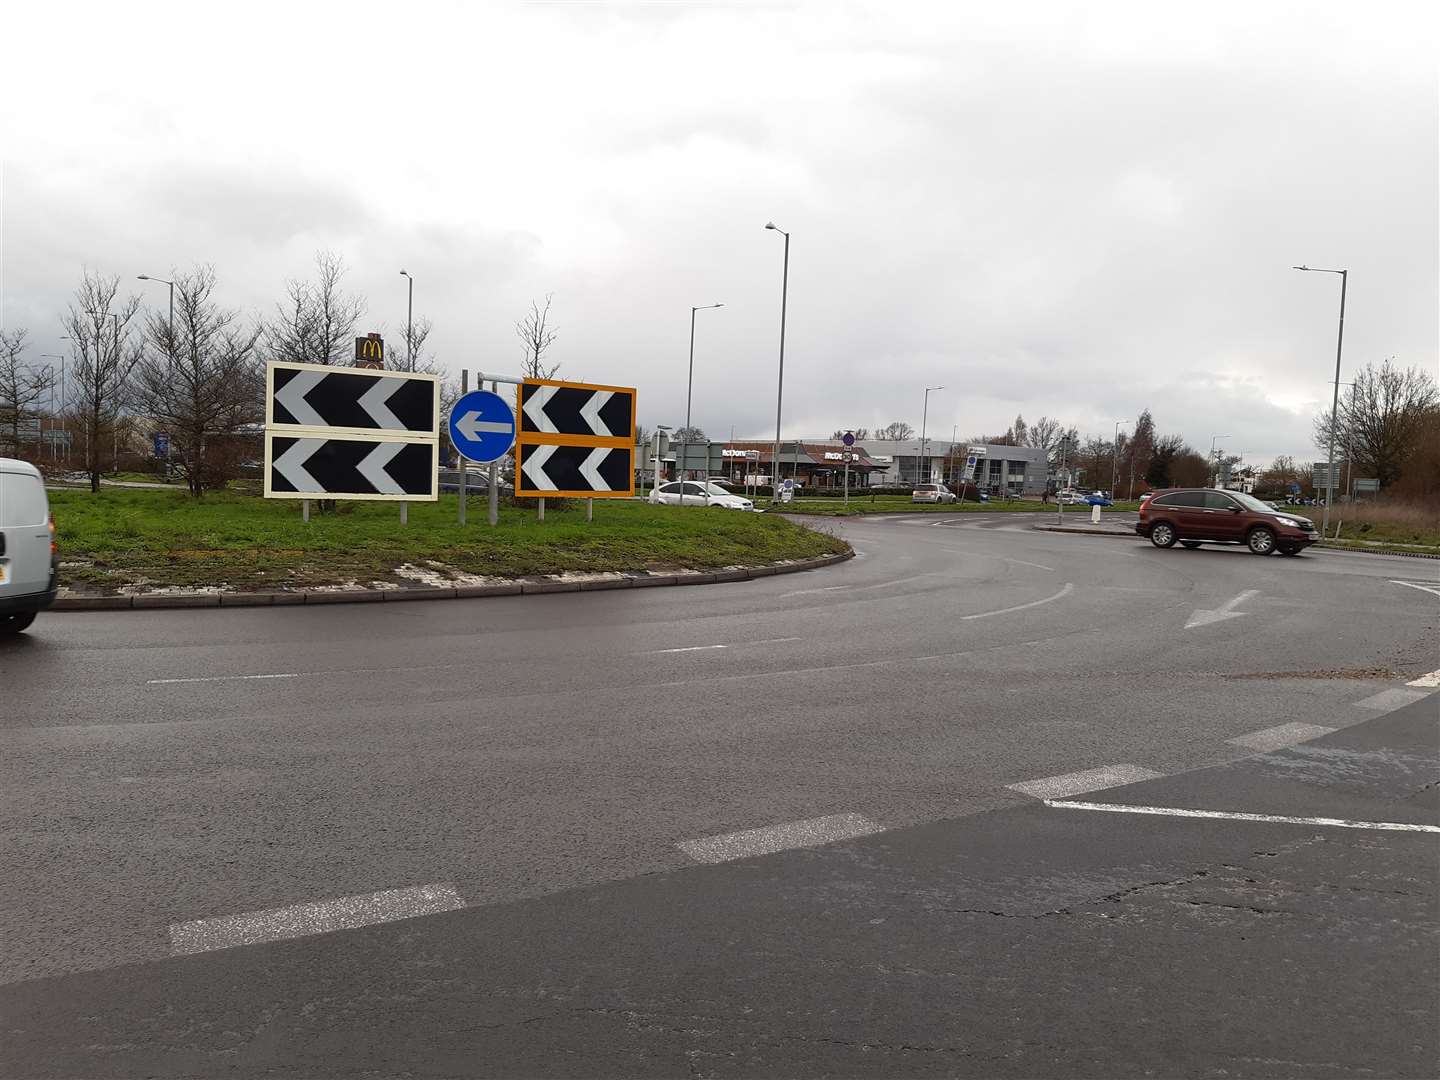 How the Orbital Park roundabout looked before